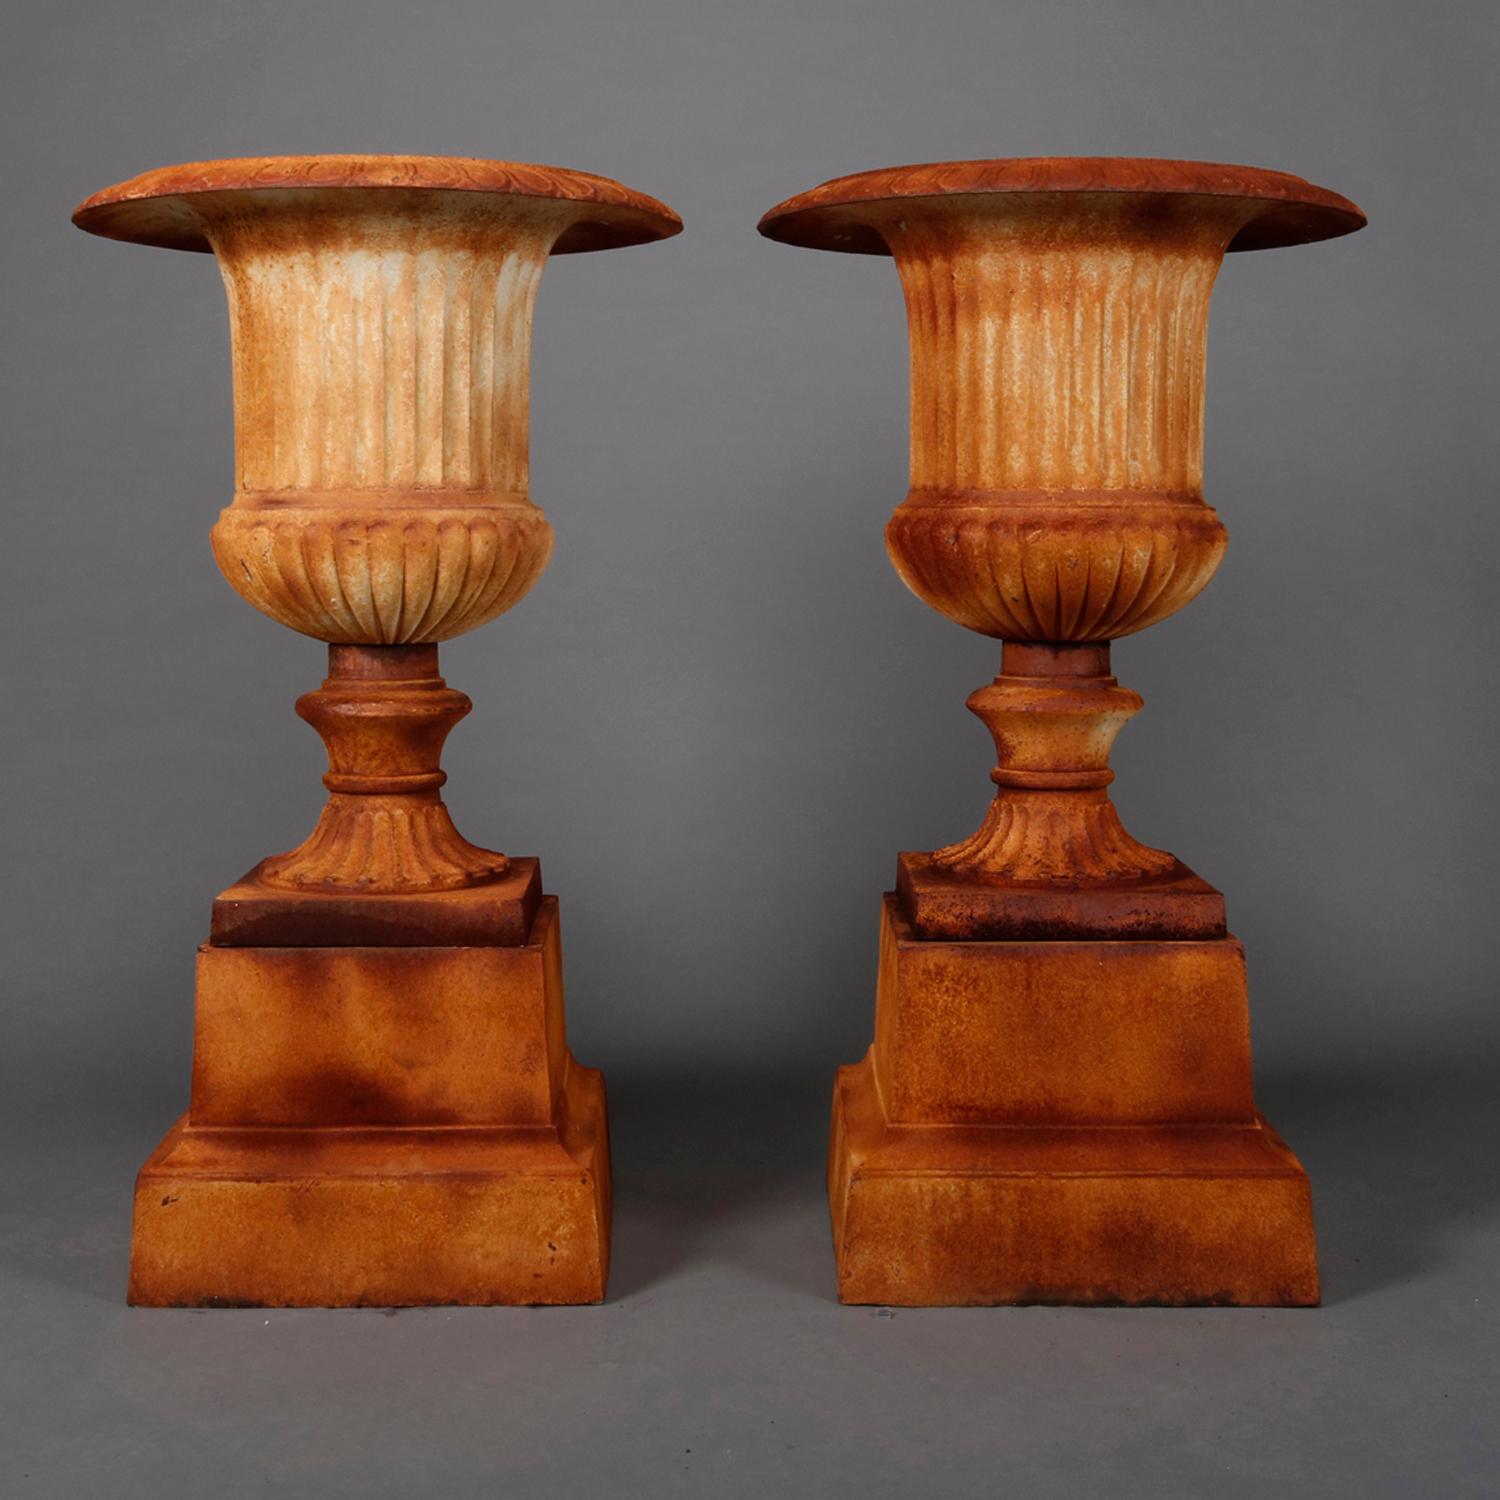 A pair of well cast French classical garden planters feature iron construction in pedestal urn form having melon bowls with egg and dart rims raised on central pedestals and seated on plinths, painted white with rust patina, 20th century.

Measures: